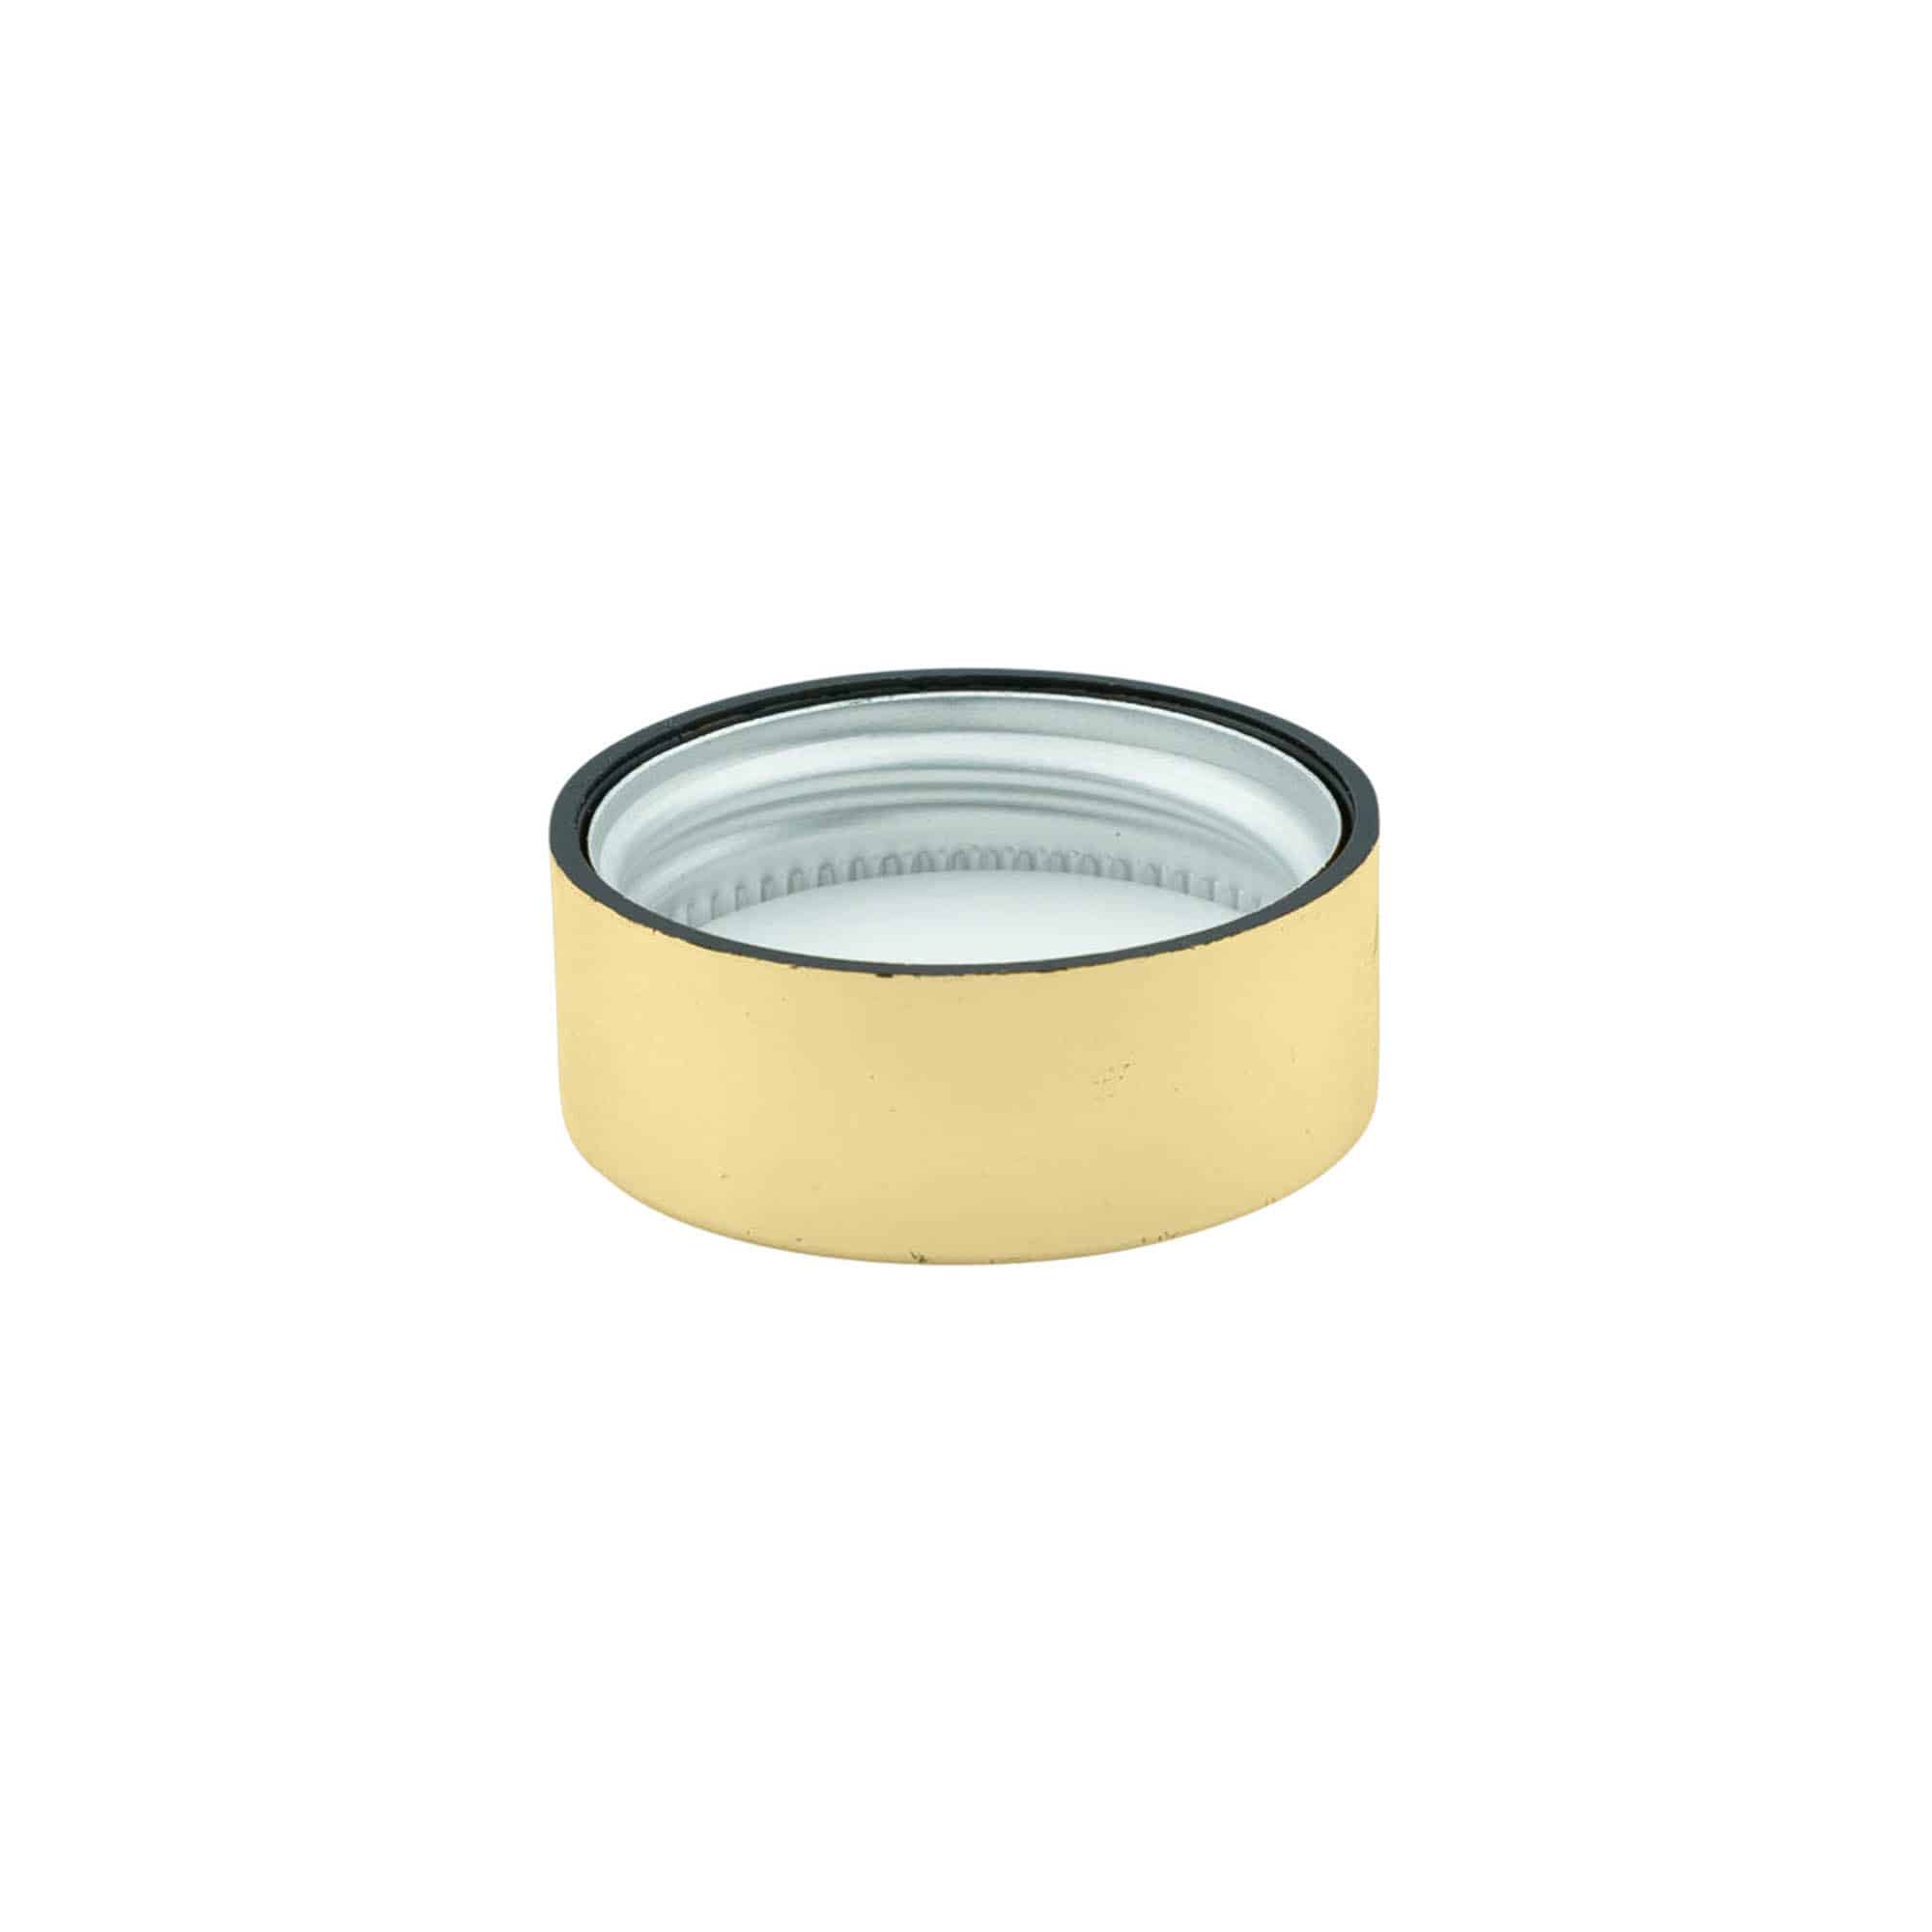 Screw cap, ABS plastic, gold, for opening: GPI 33/400